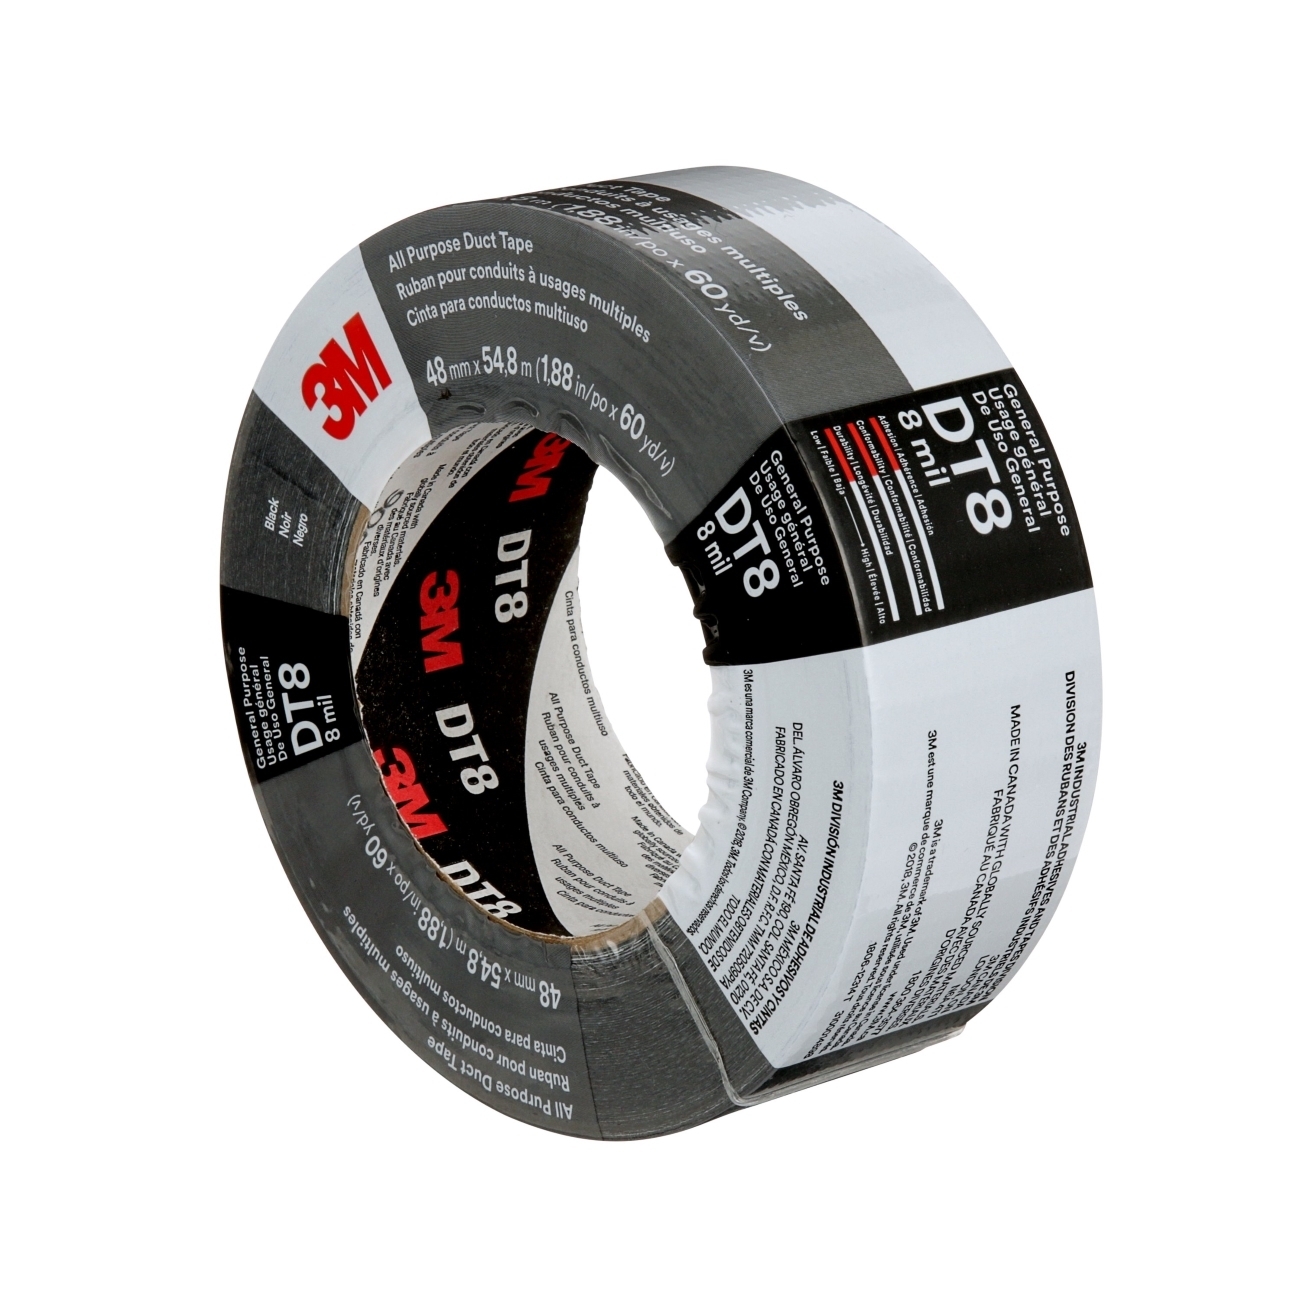 3M All-purpose adhesive tape DT8, silver, 48 mm x 23 m, 0.2 mm